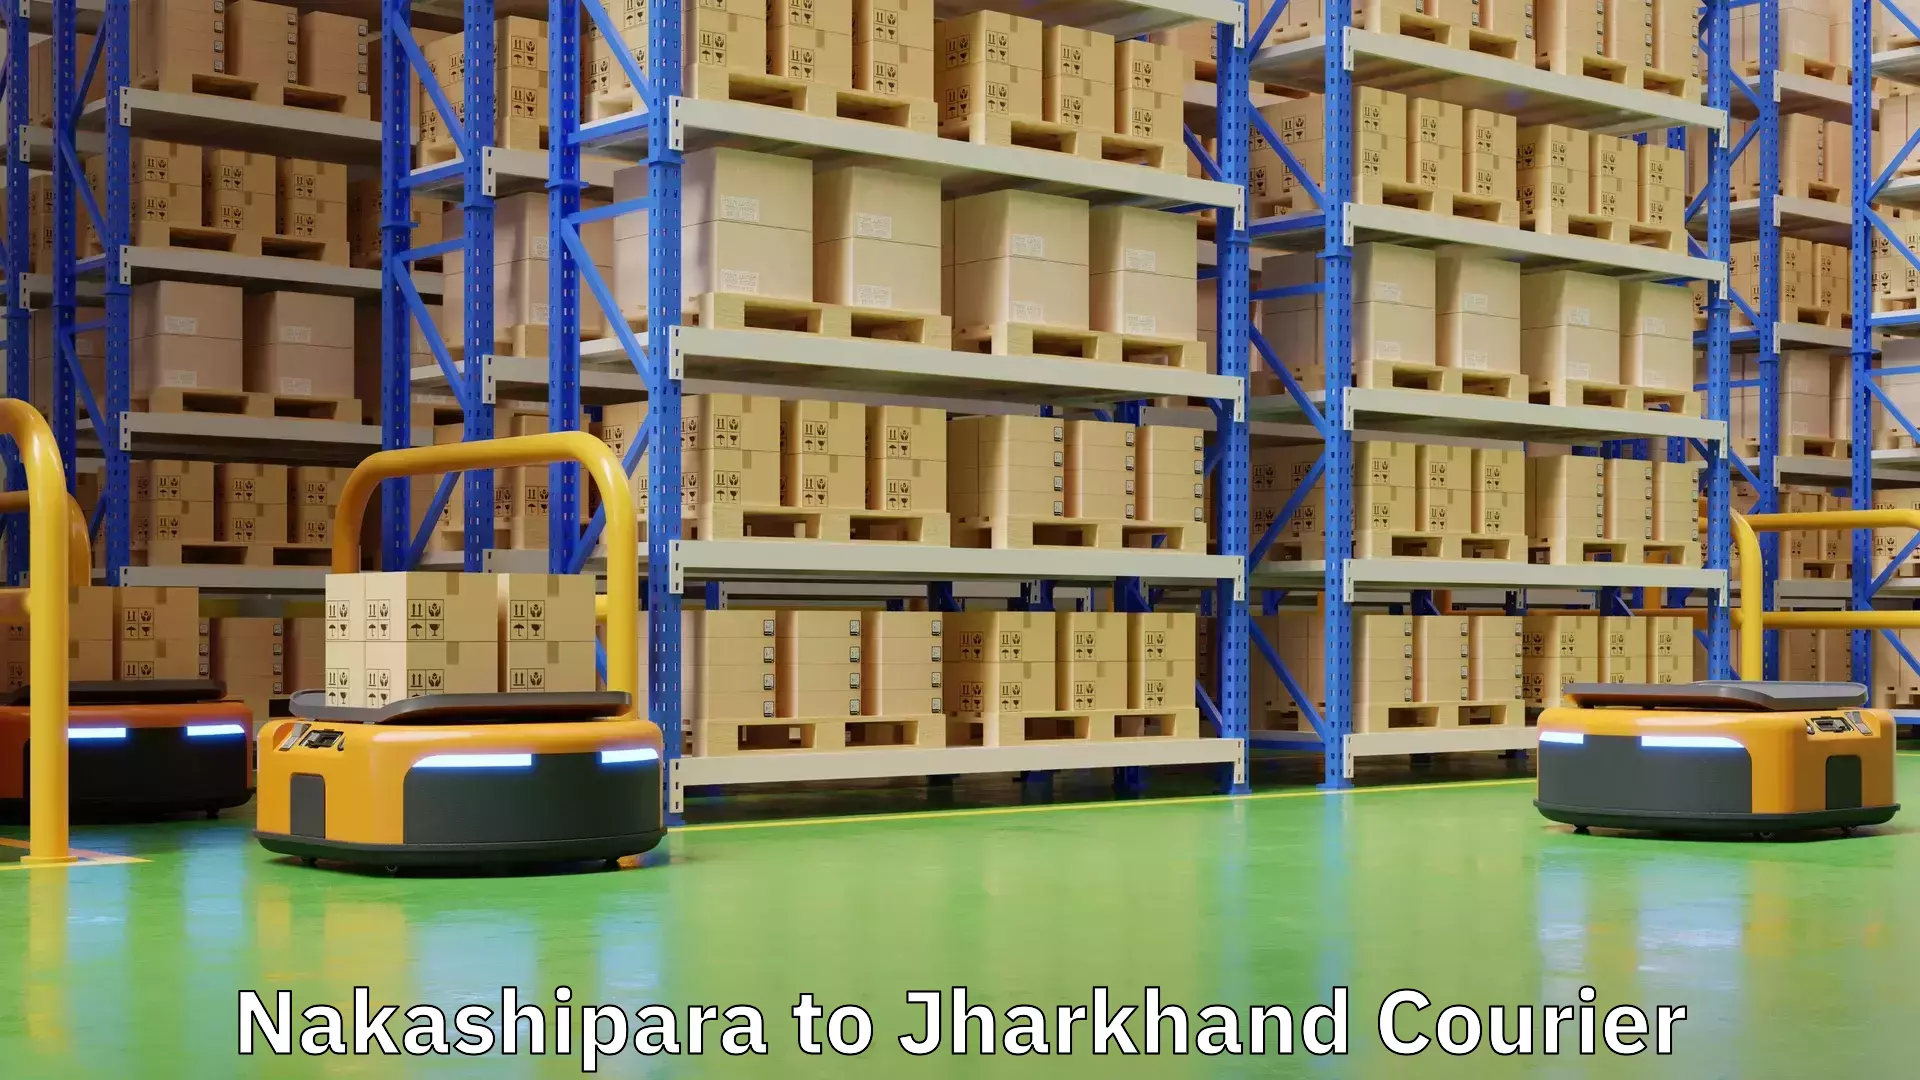 Courier service comparison in Nakashipara to Jharkhand